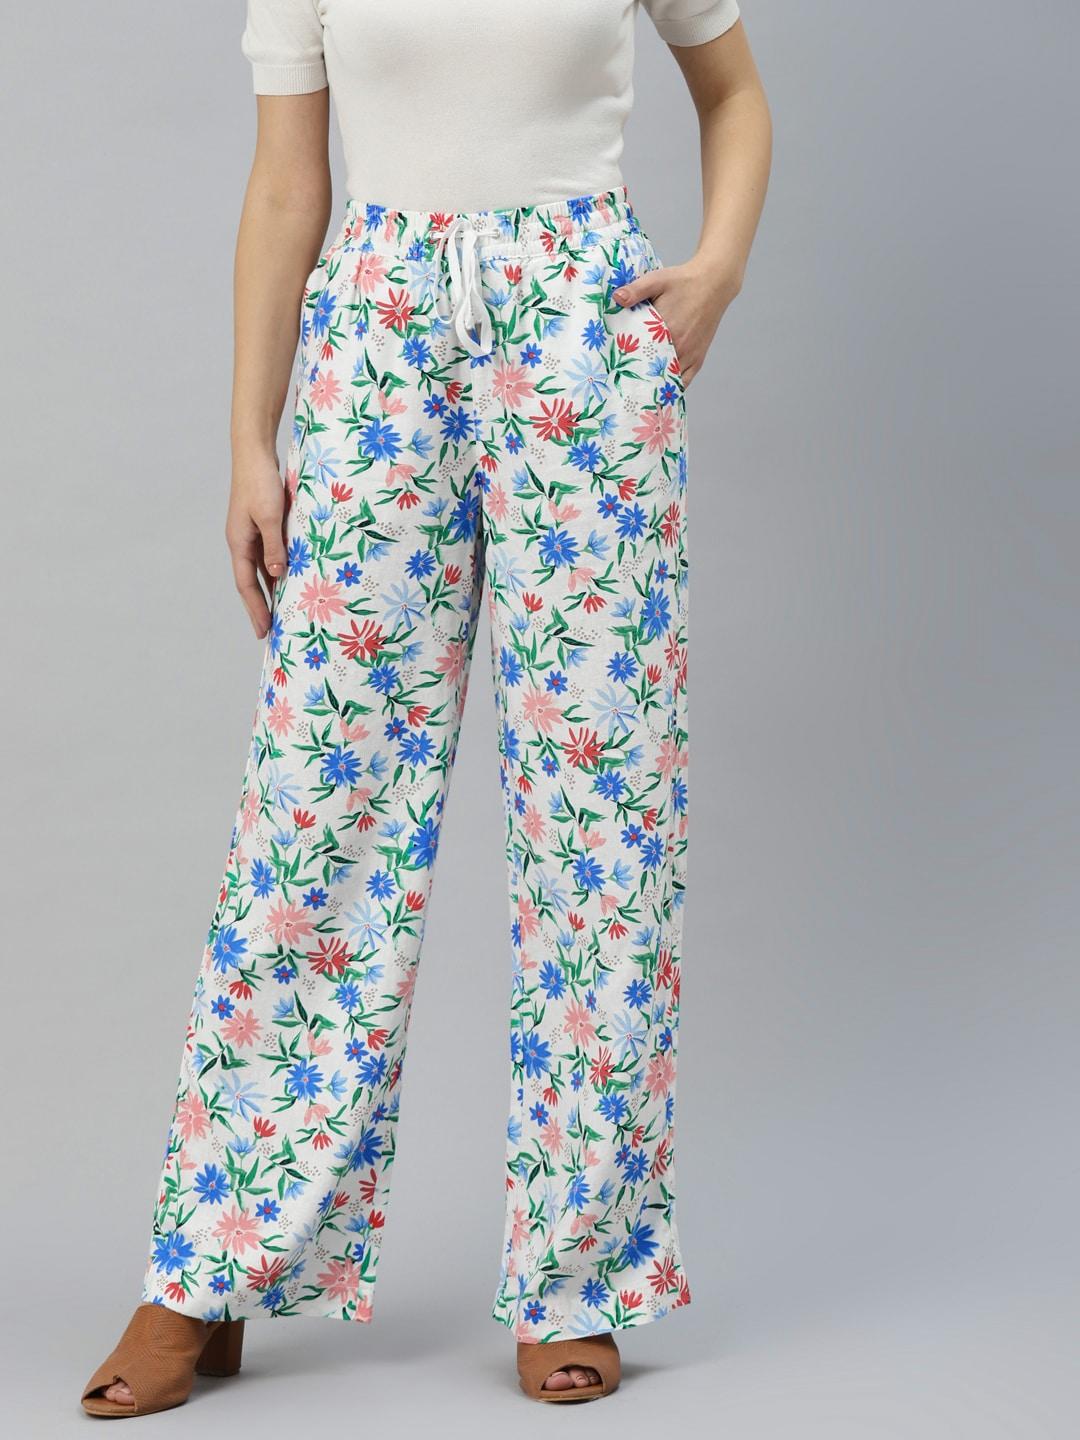 Marks & Spencer Women White & Blue Floral Print Trousers